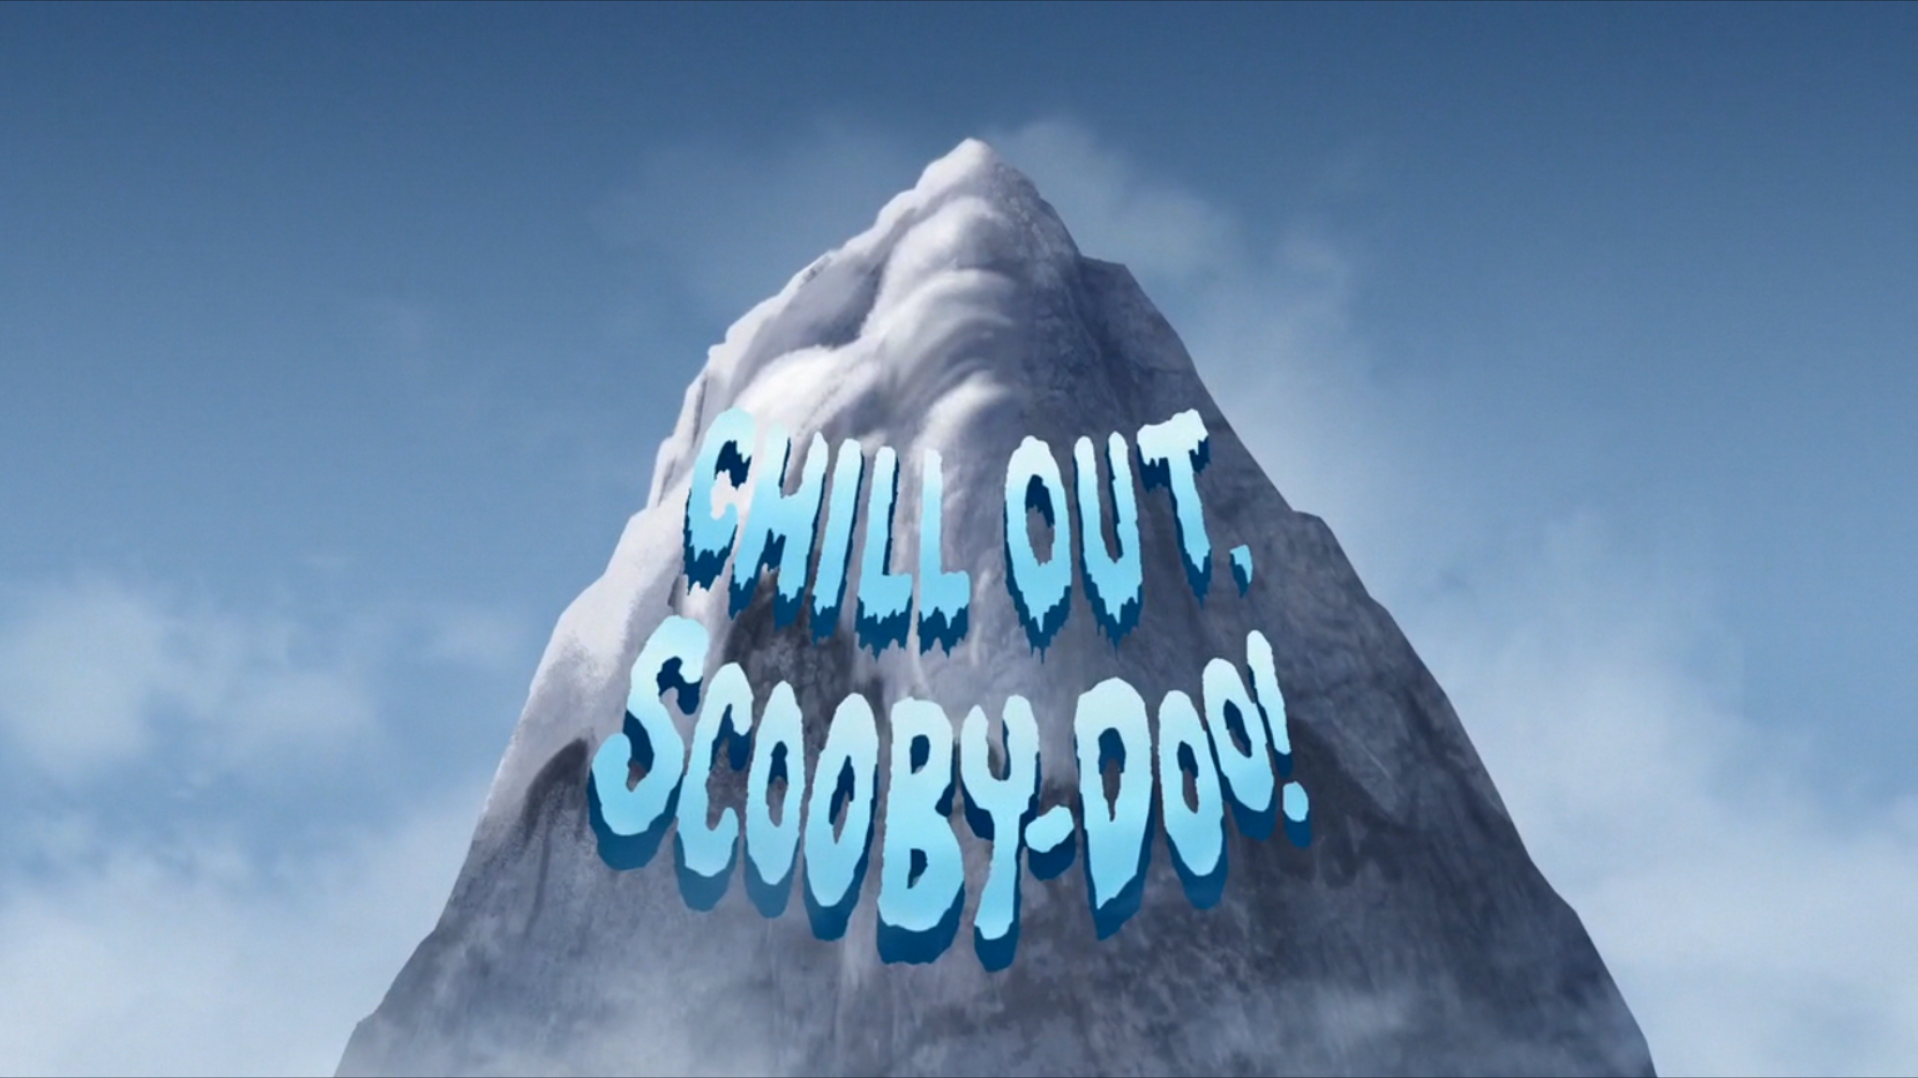 Chill Out, Scooby-Doo!, Scoobypedia